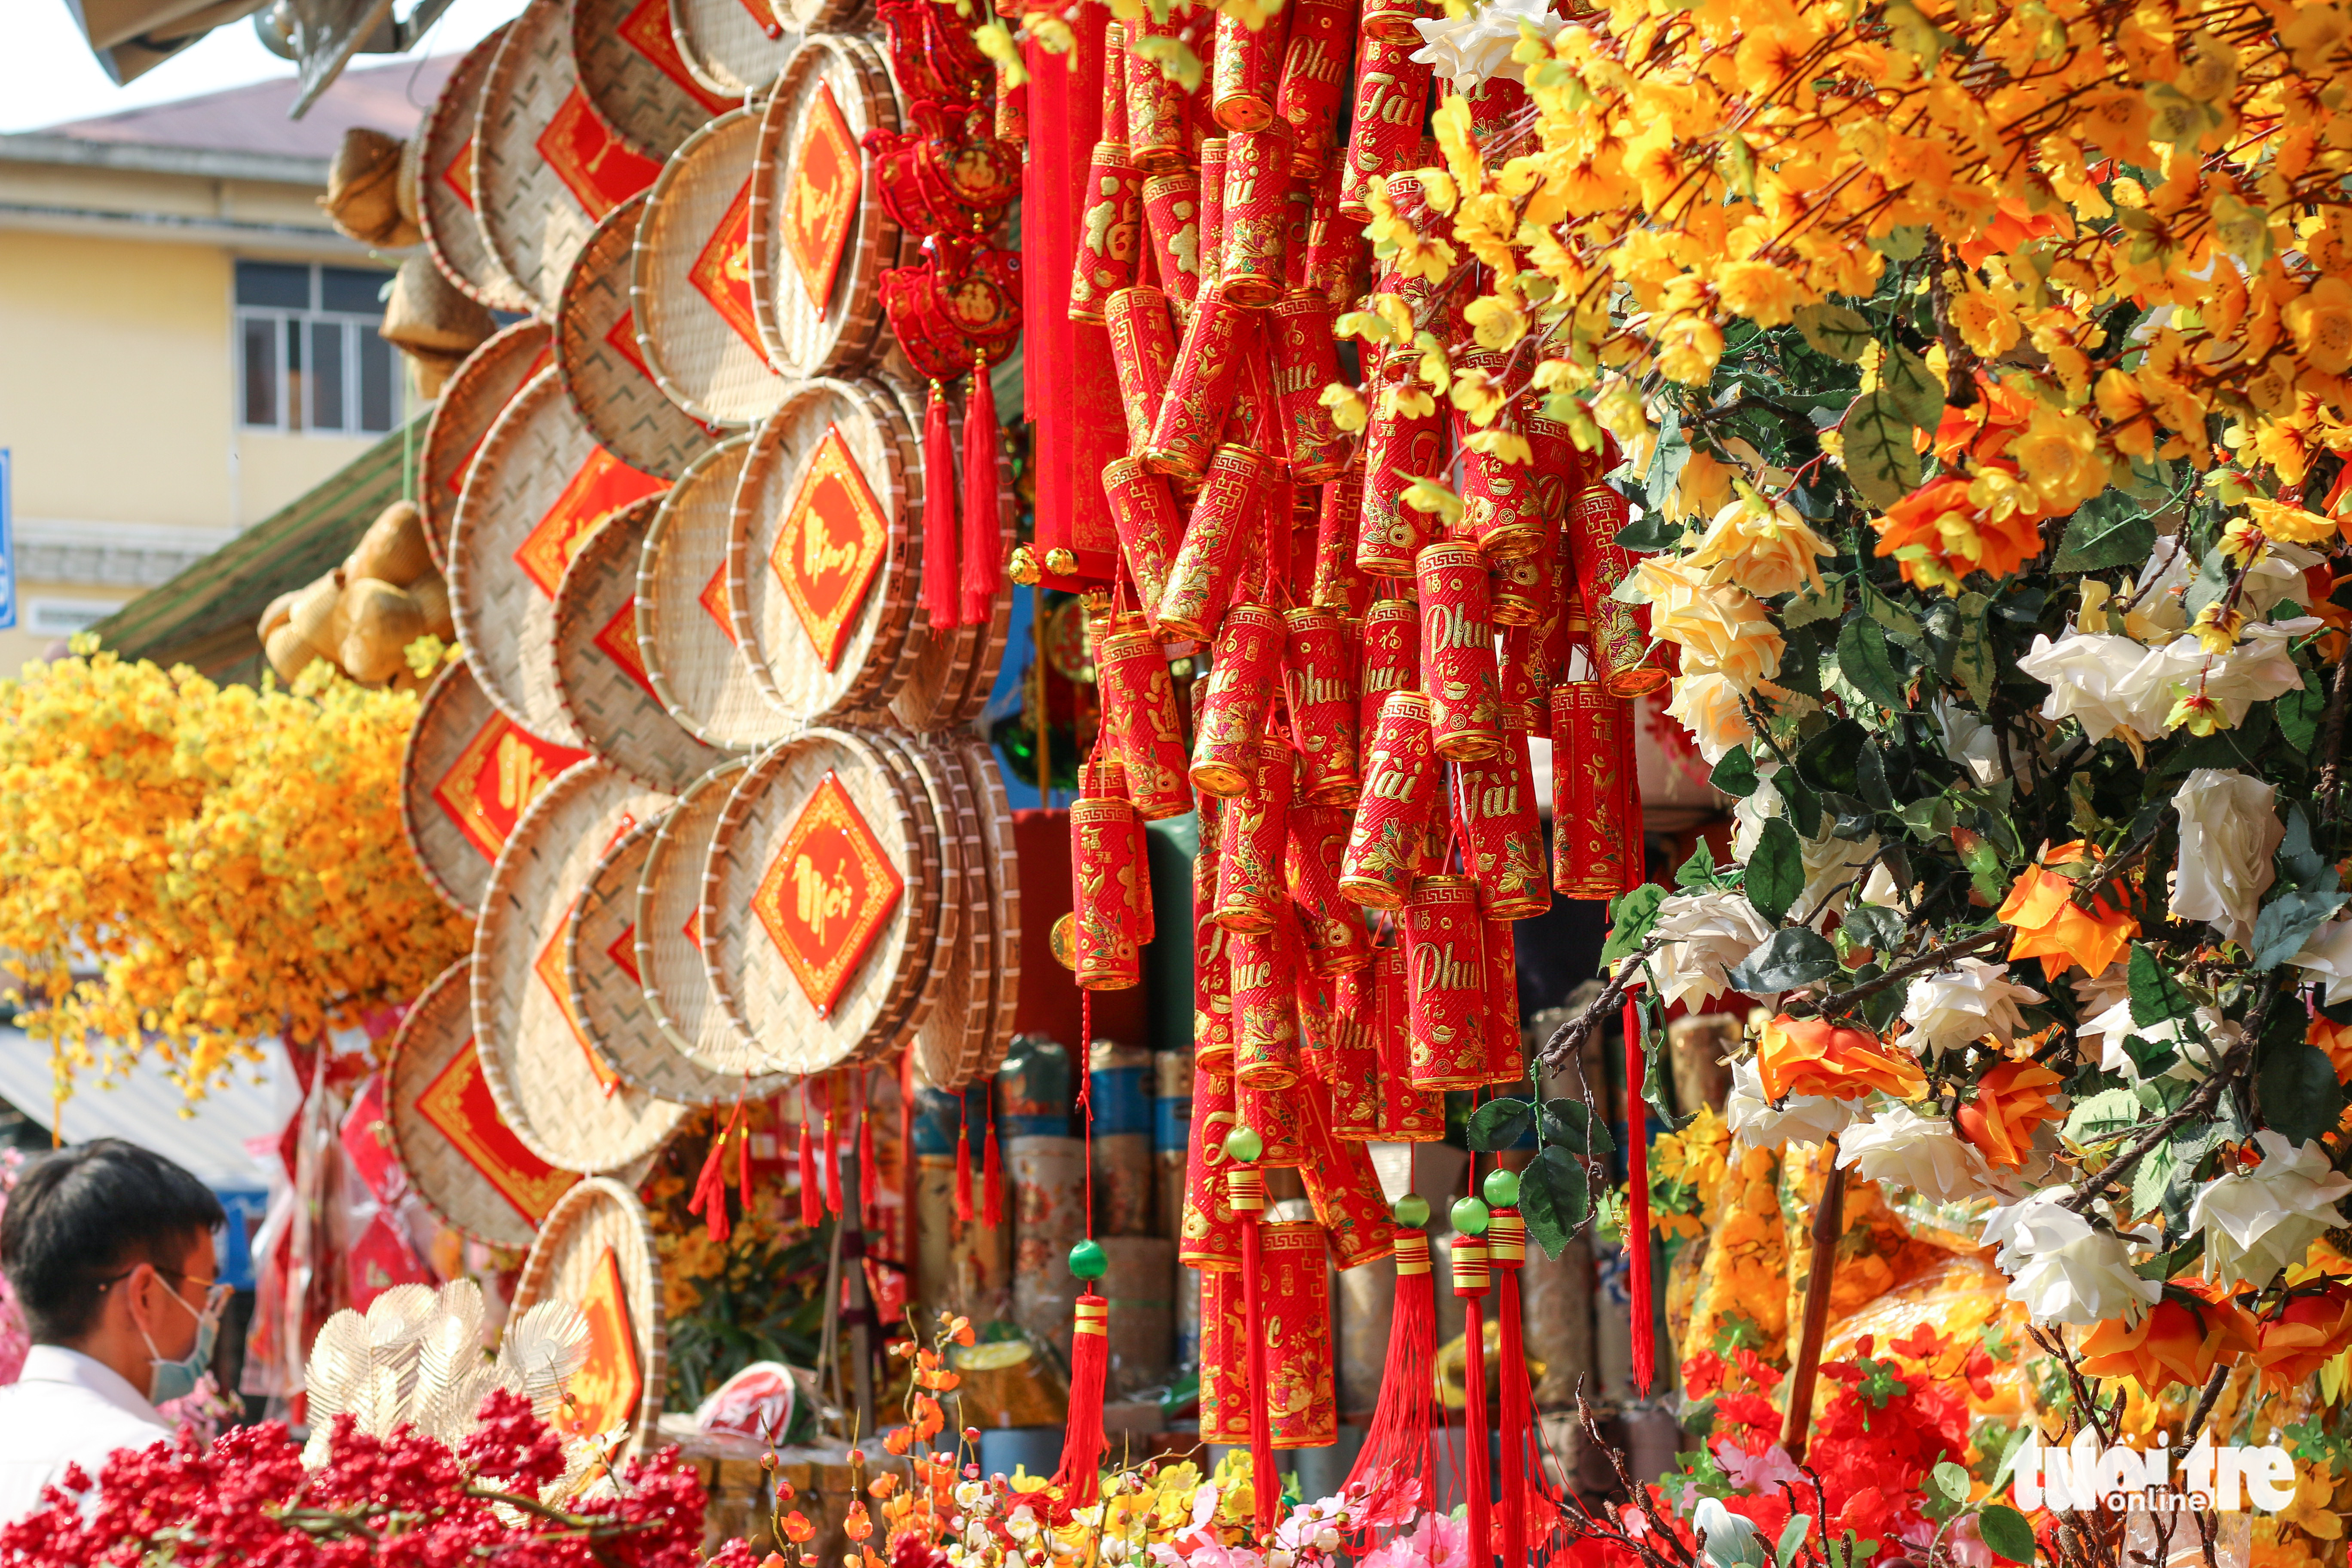 A shop sells red couplets, paper cannons, and artificial apricots and peach blossoms at ‘Tai loc’ Market on Hai Thuong Lan Ong Street in District 5, Ho Chi Minh City. Photo: Chau Tuan / Tuoi Tre